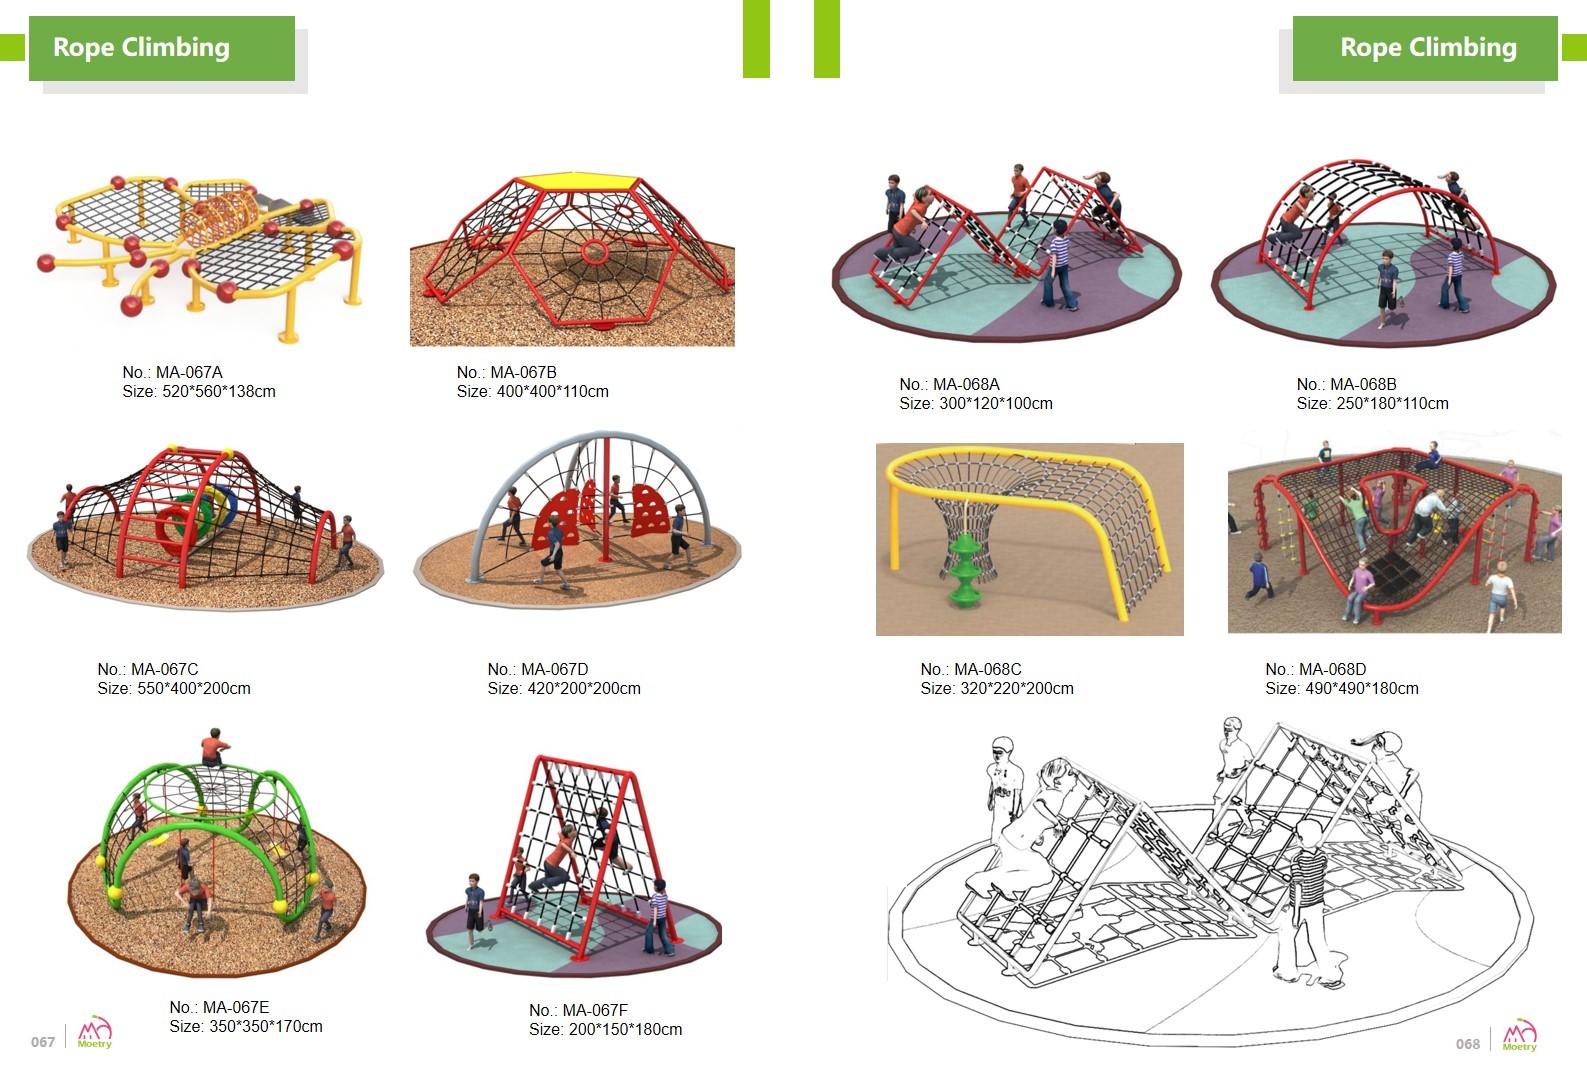 Different models of children's rope climbing outdoor play structure in Moetry's catalogue